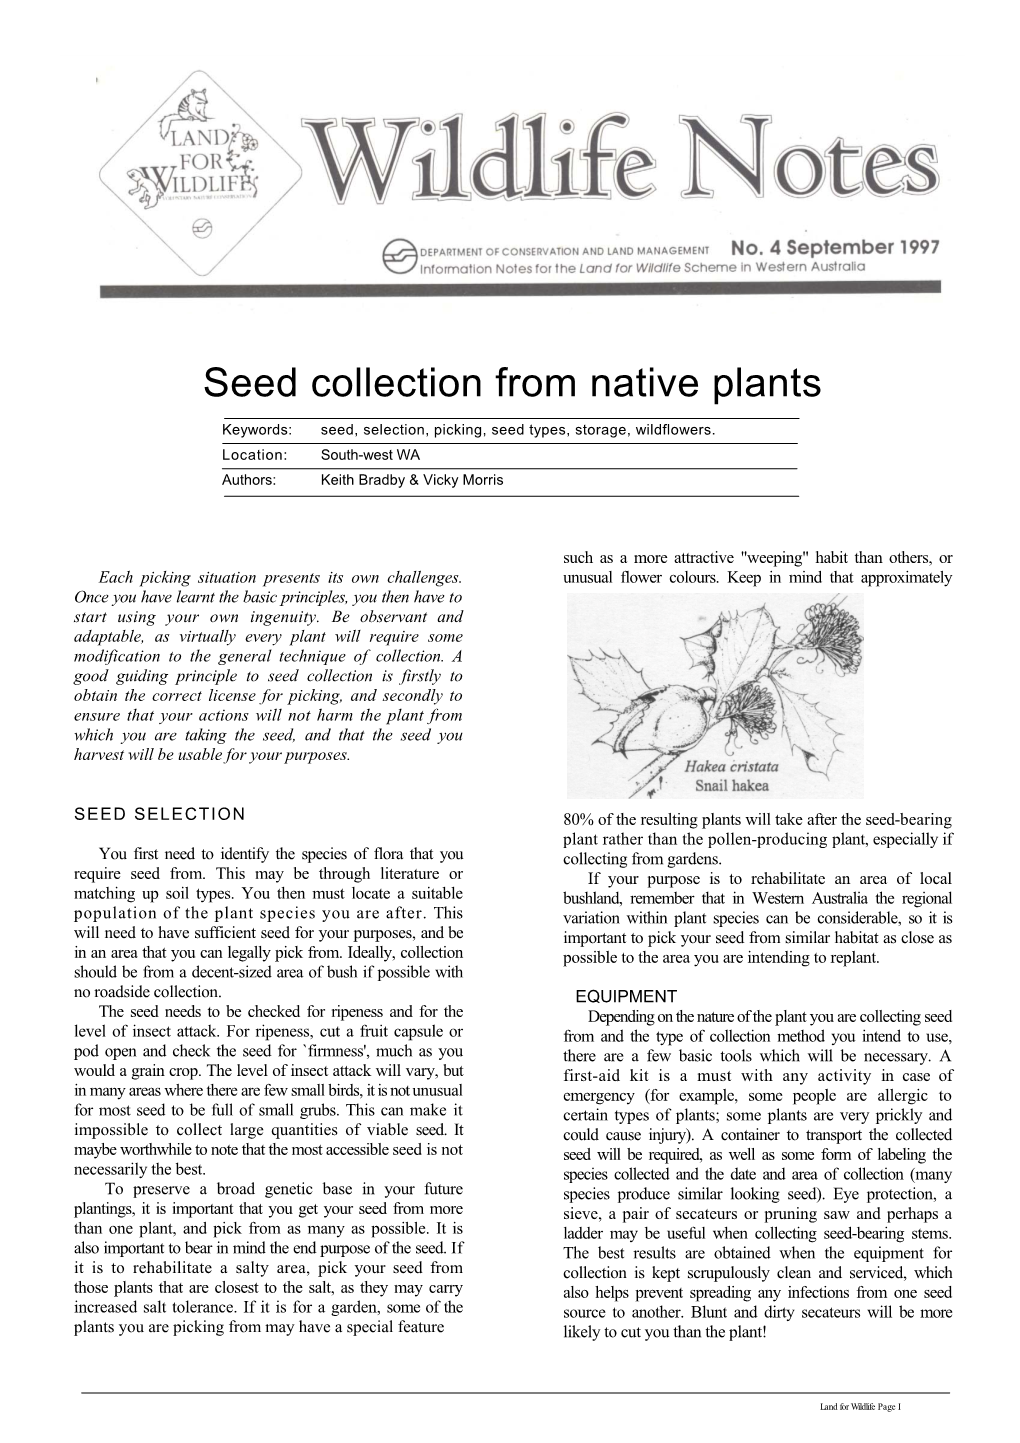 Seed Collection from Native Plants